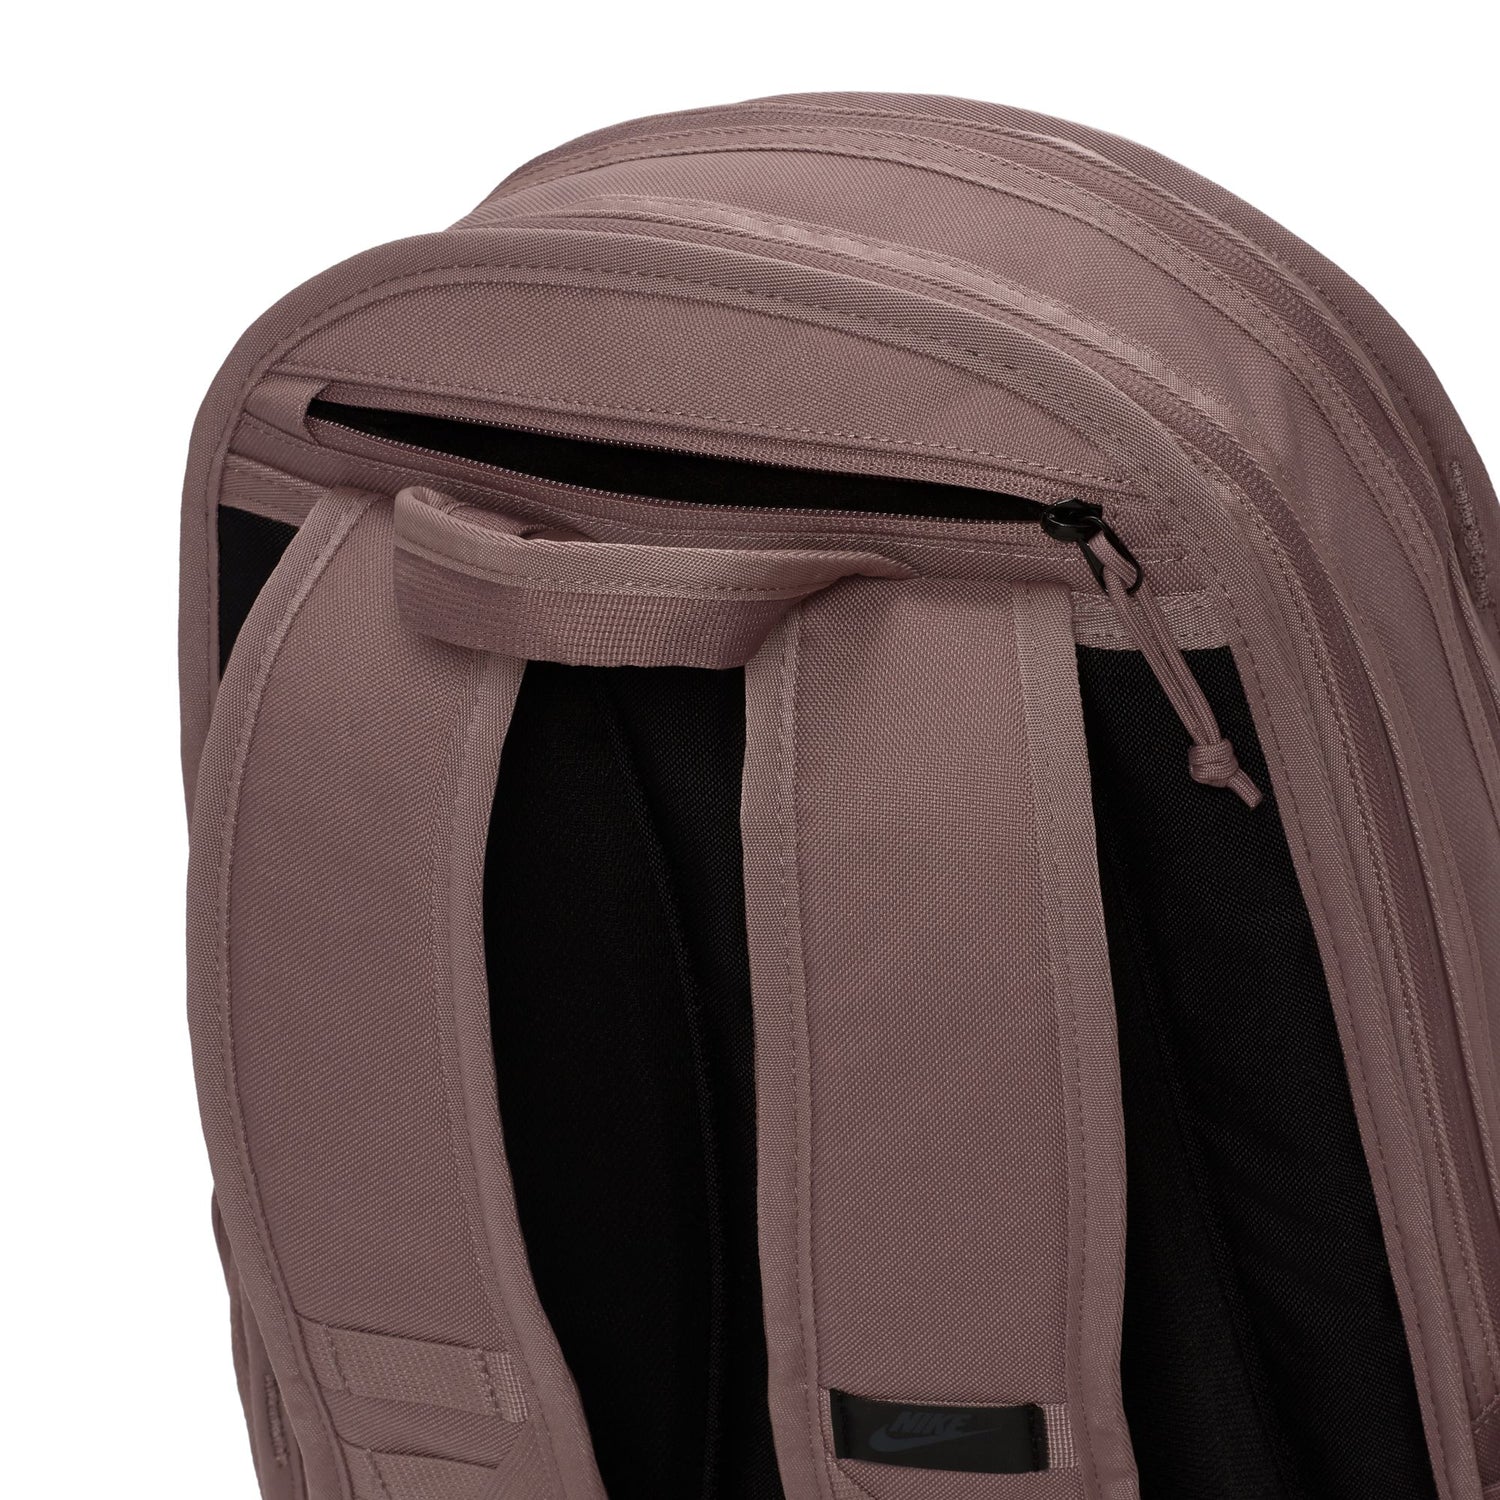 RPM BACKPACK PLUM ECLIPSE / ANTHRACITE